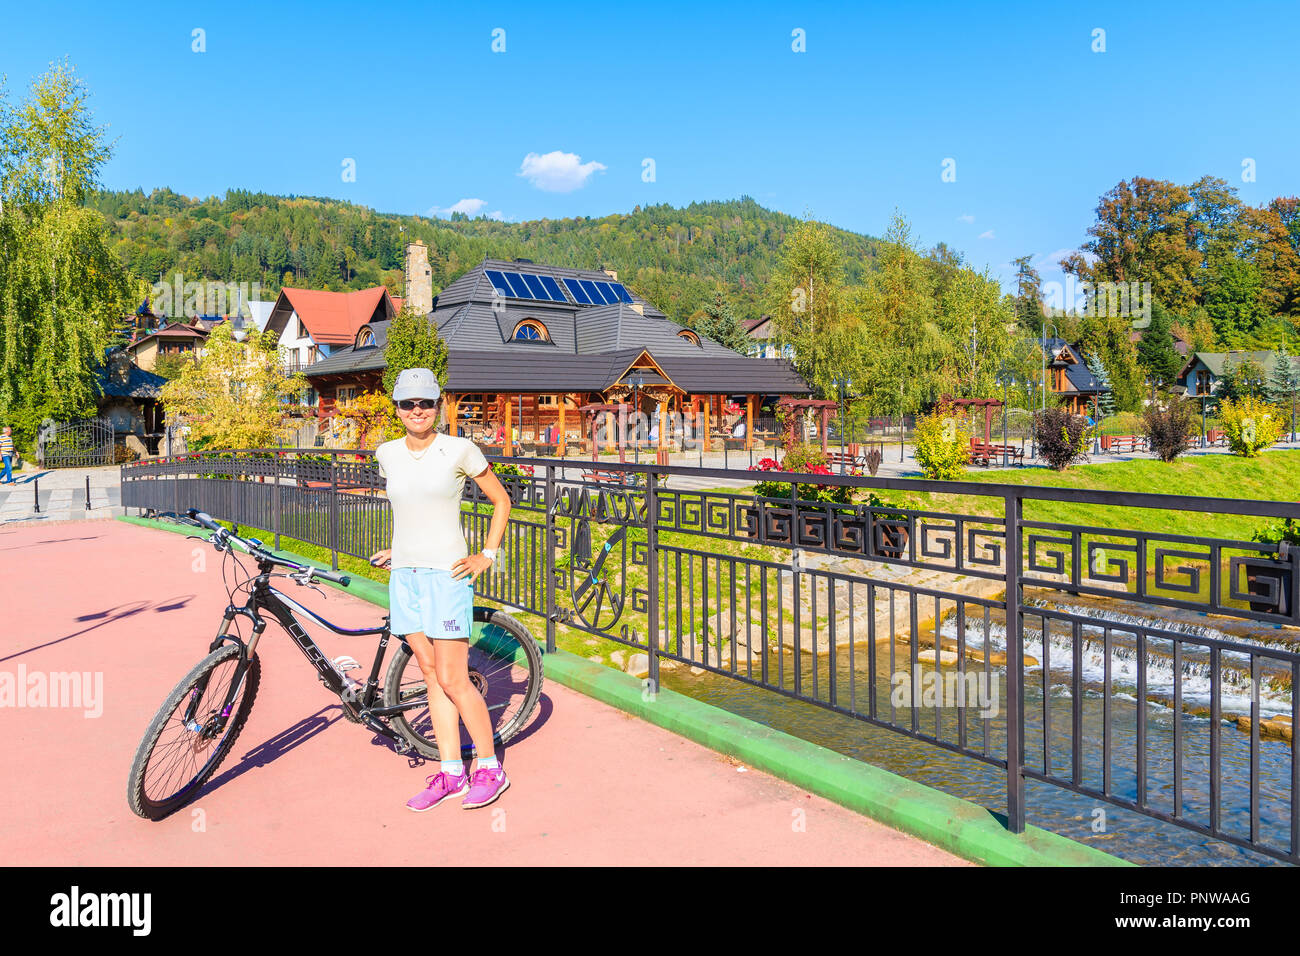 SZCZAWNICA, POLAND - SEP 19, 2018: Young woman bicyclist standing on bridge in Szczawnica. This place is a well-known resort town famous for its favor Stock Photo